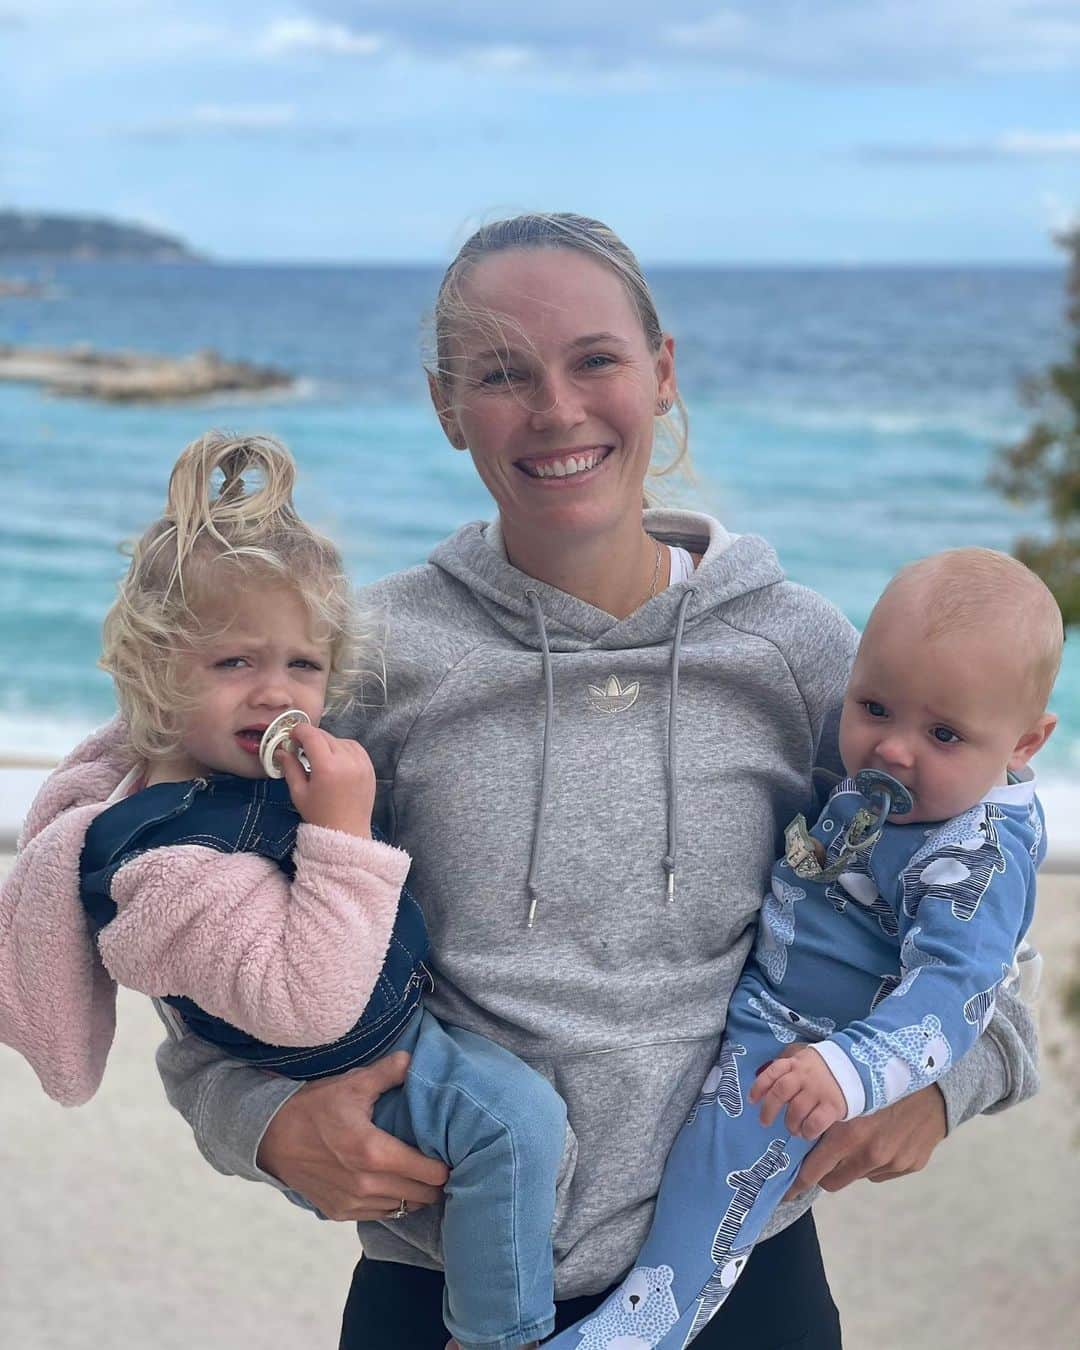 CarolineWozniackiのインスタグラム：「From One to Two: My Journey as a Mother - Dive into my blog post where I share my experience with BIBS on navigating the transition of expanding our family. Click the link in my bio or visit Bibsworld.com to read all about it! #MotherhoodJourney #ExpandingFamily #BIBS @theofficialbibs」